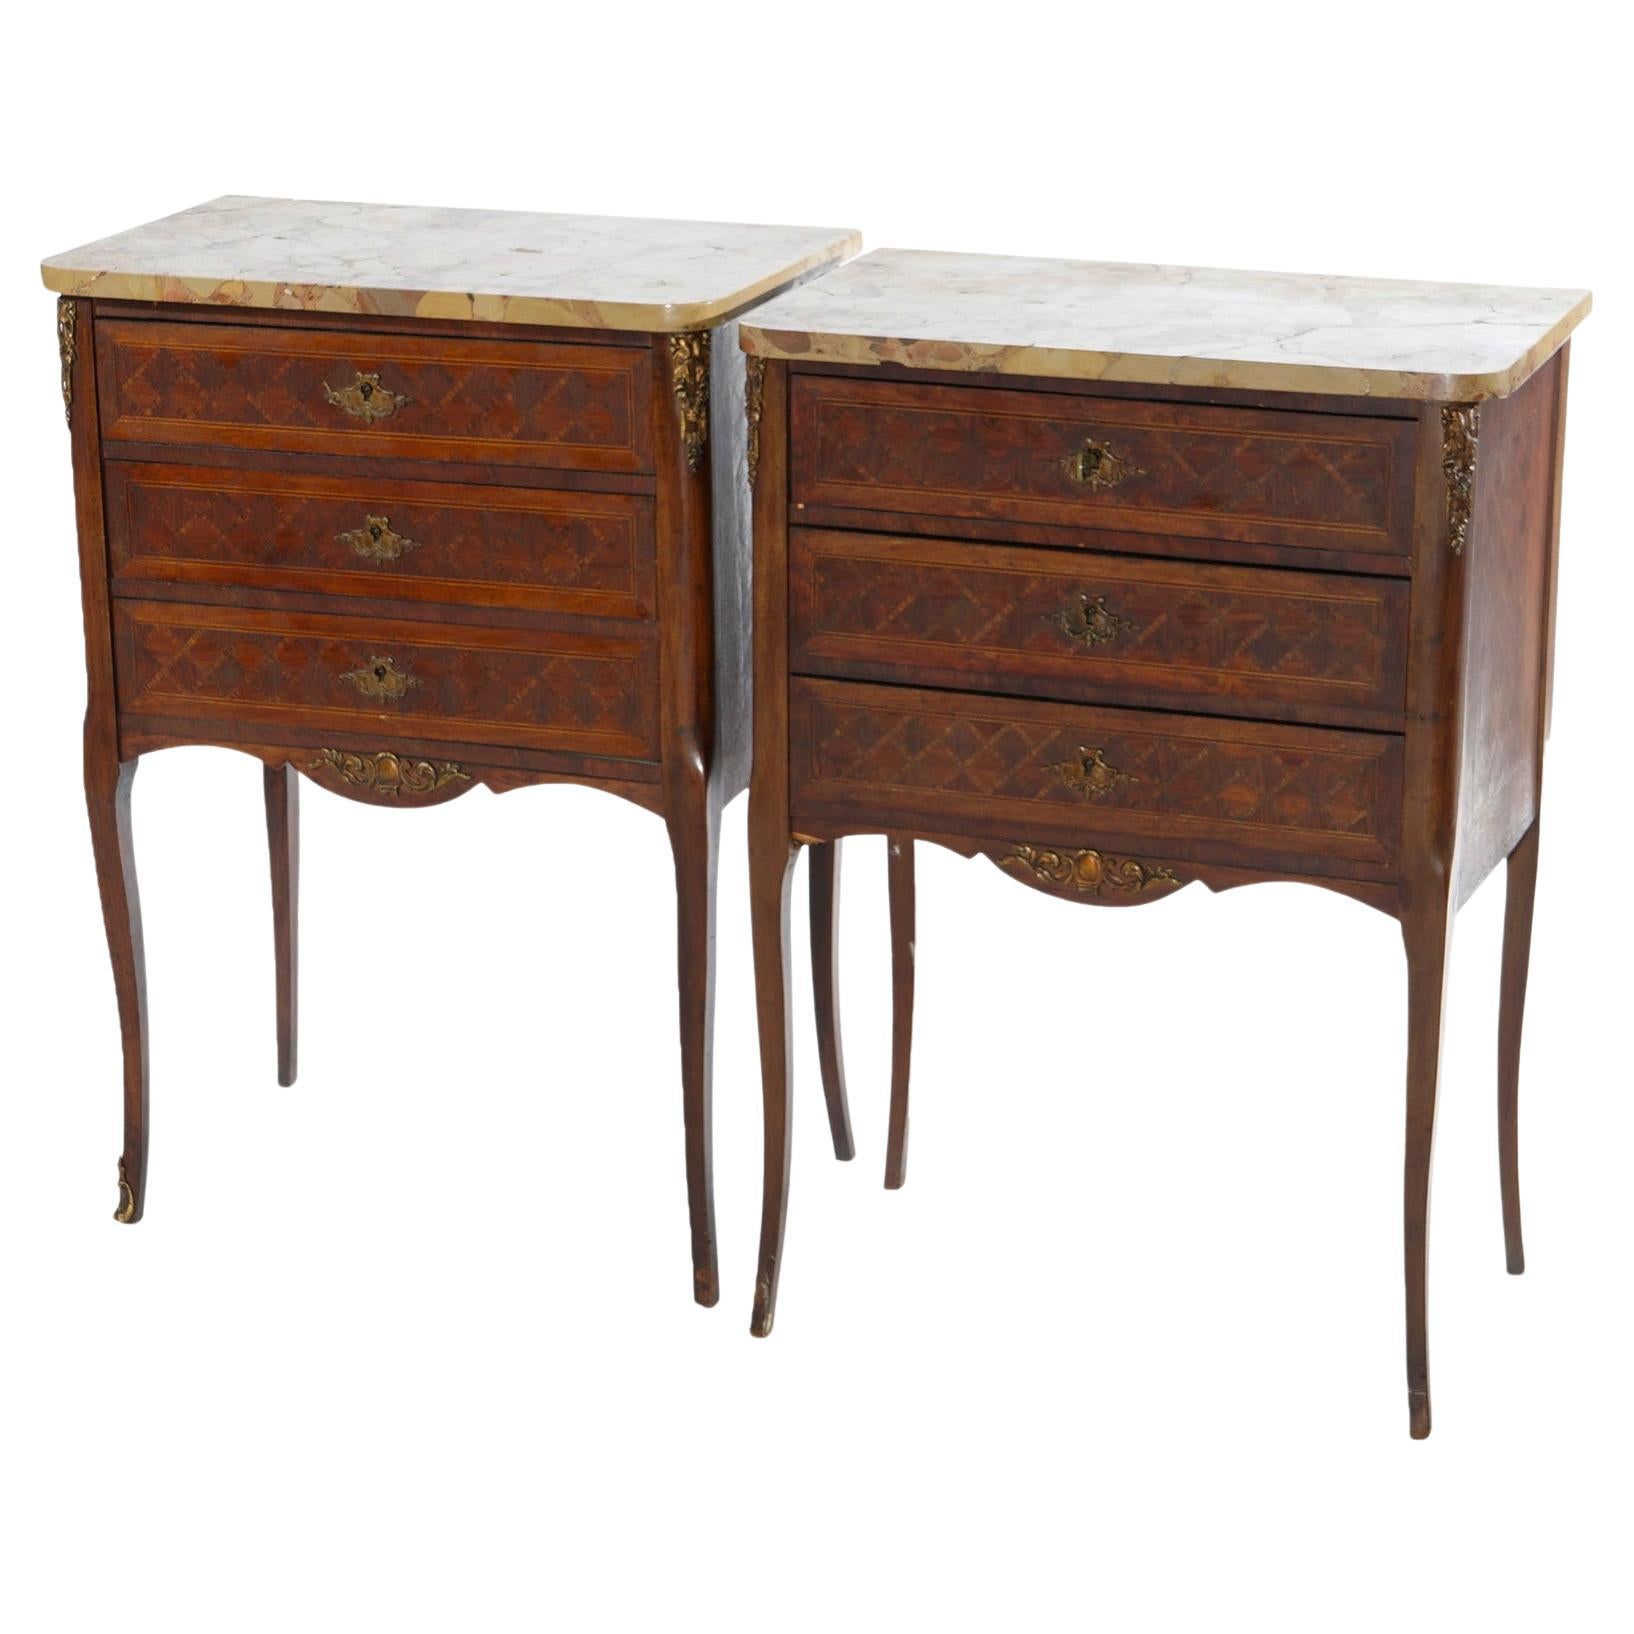 Antique Pair French Kingwood Satinwood Inlaid Marble Top Side Tables circa 1910